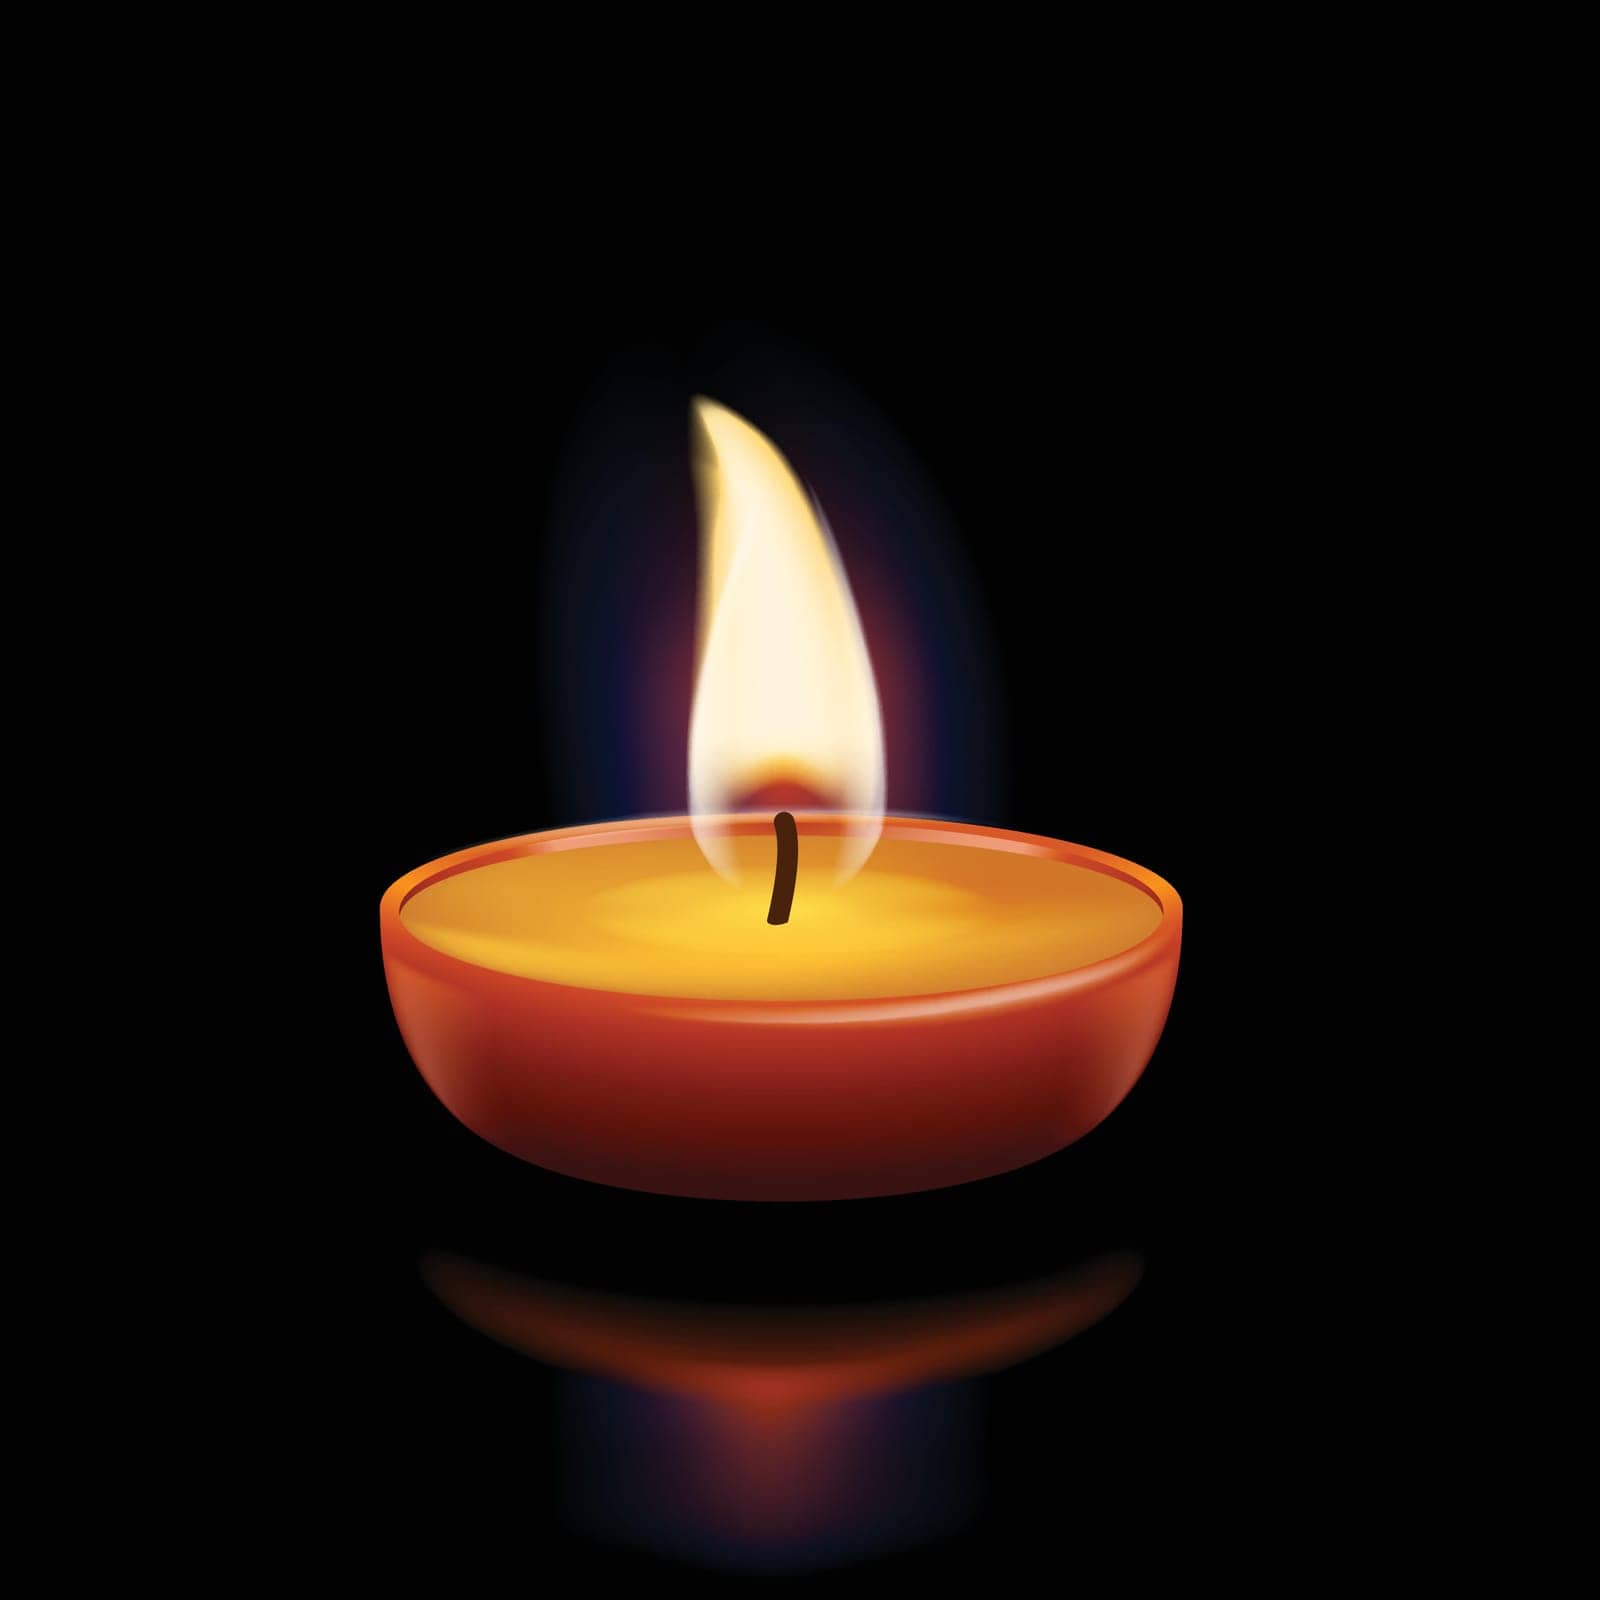 illustration of single burning candle with reflection in the darkness